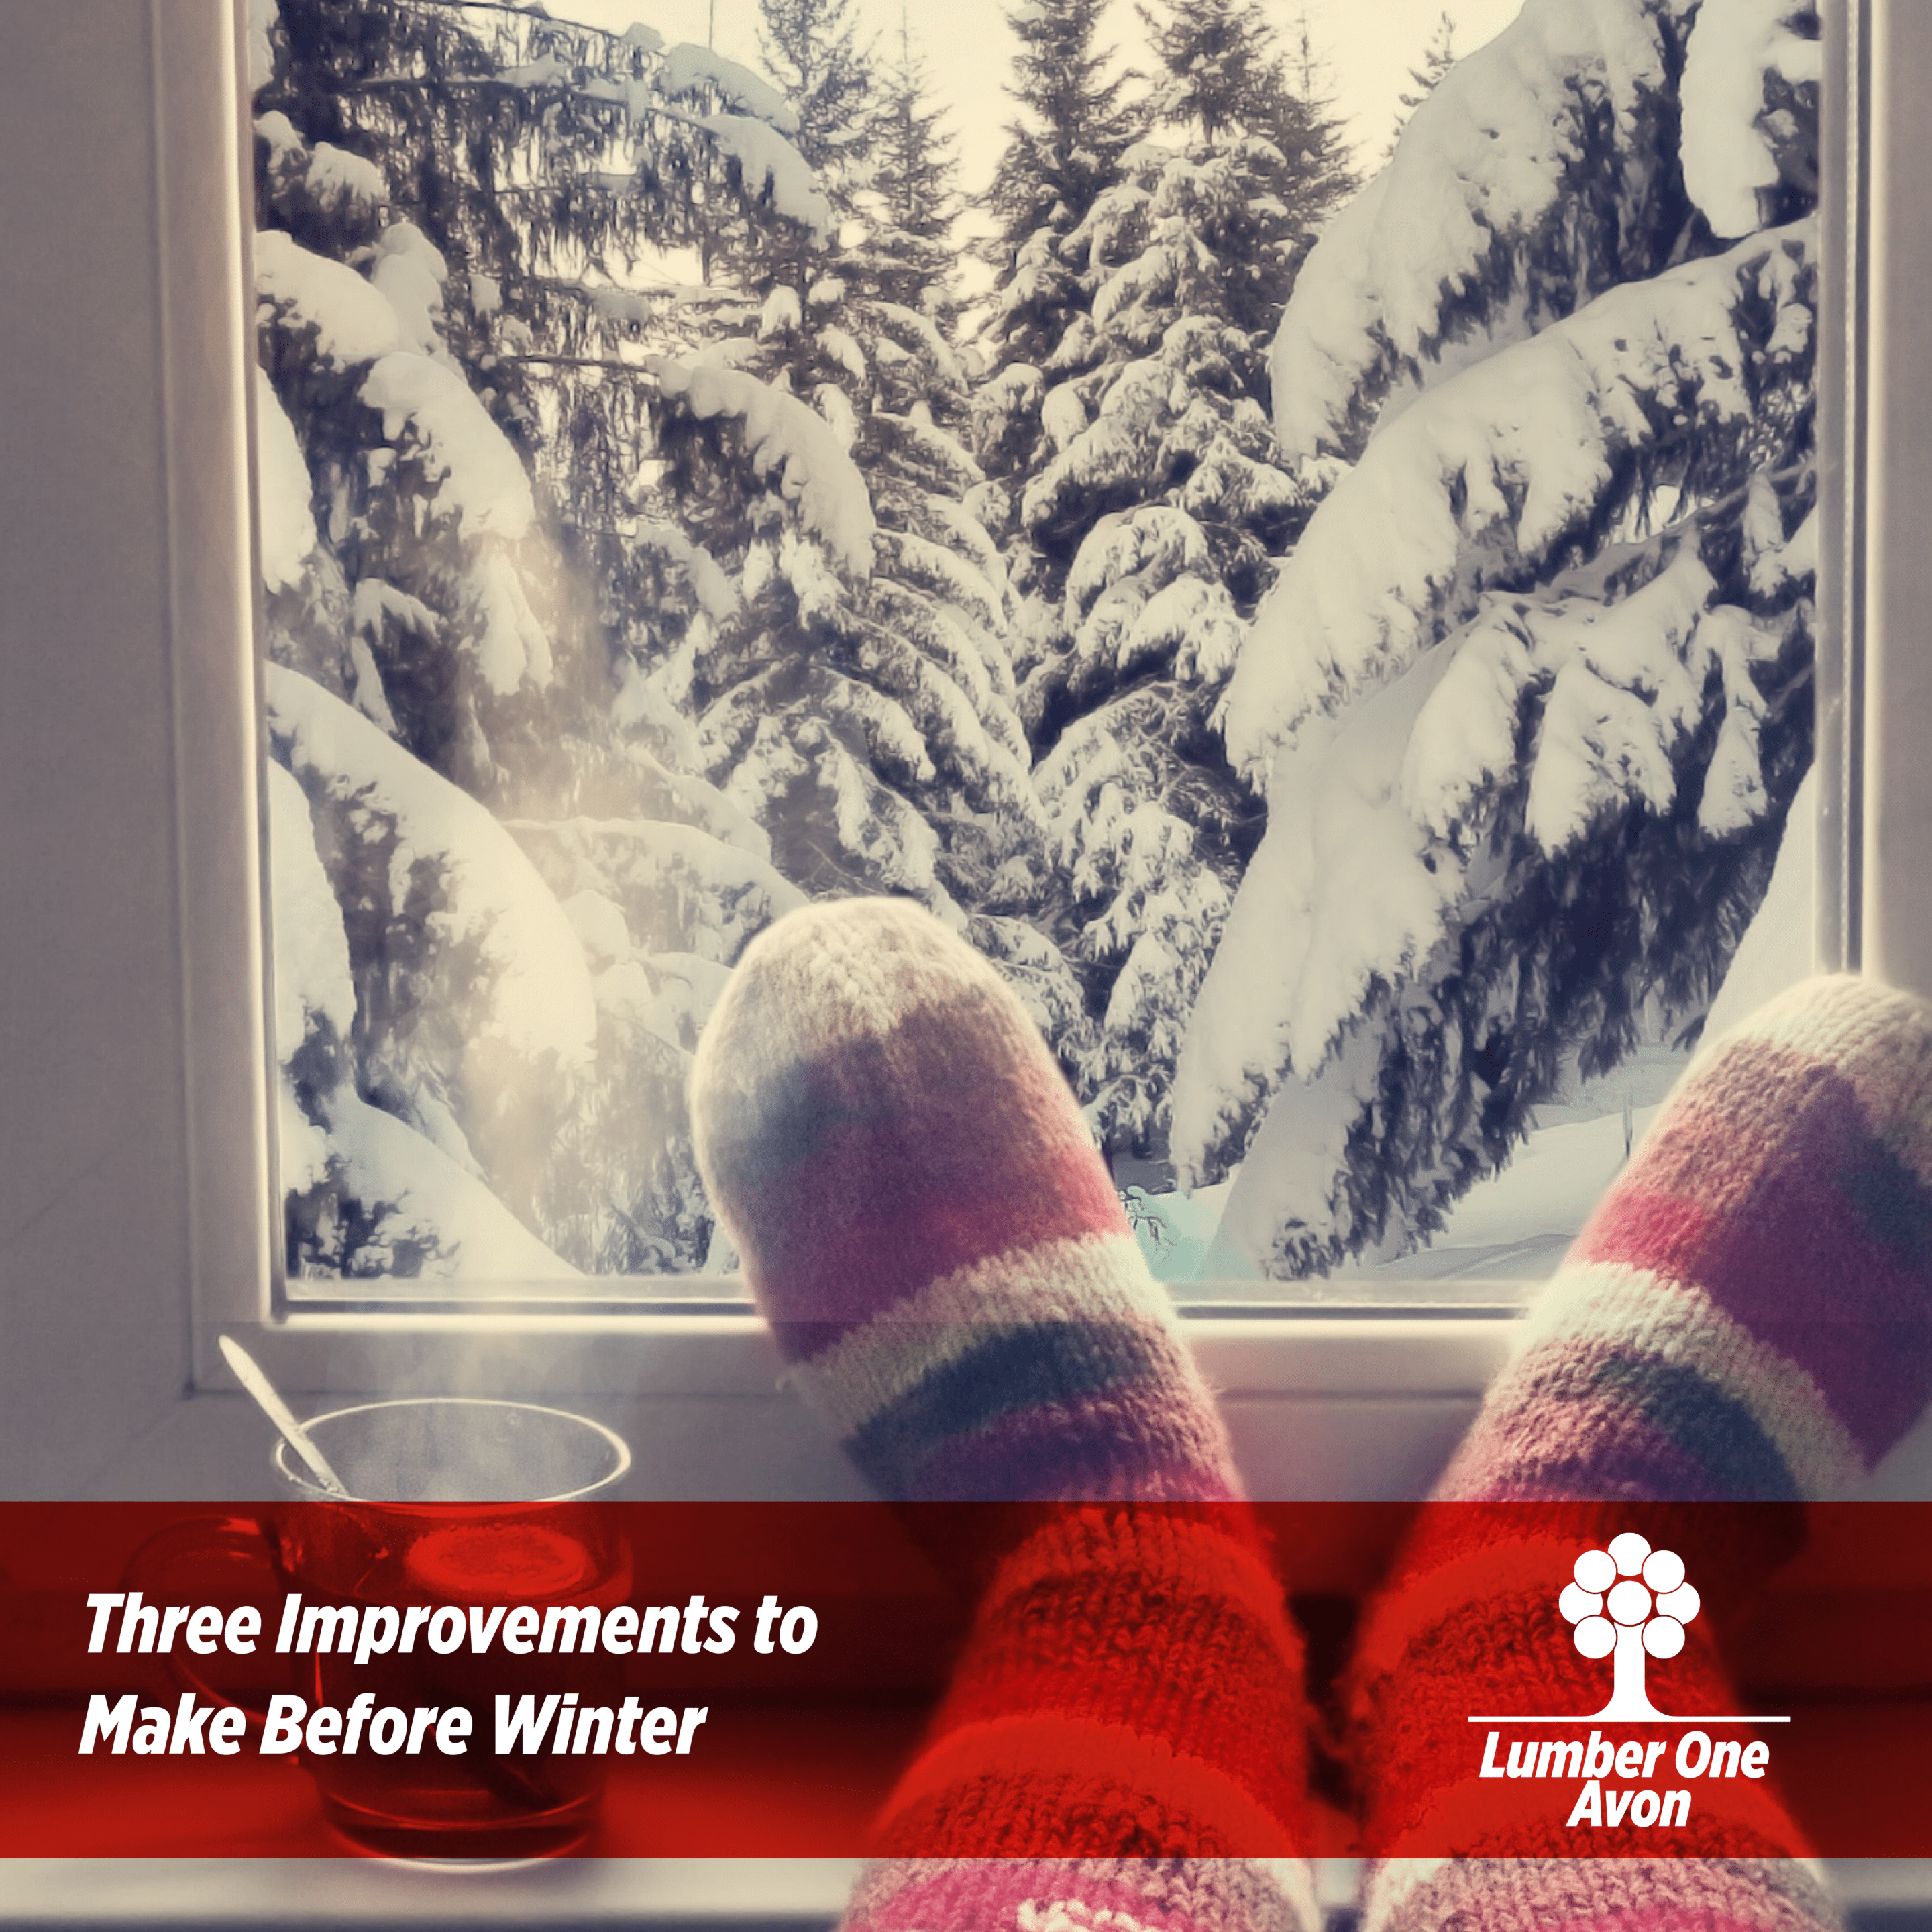 The Top 3 Home Improvements to Make Before Winter